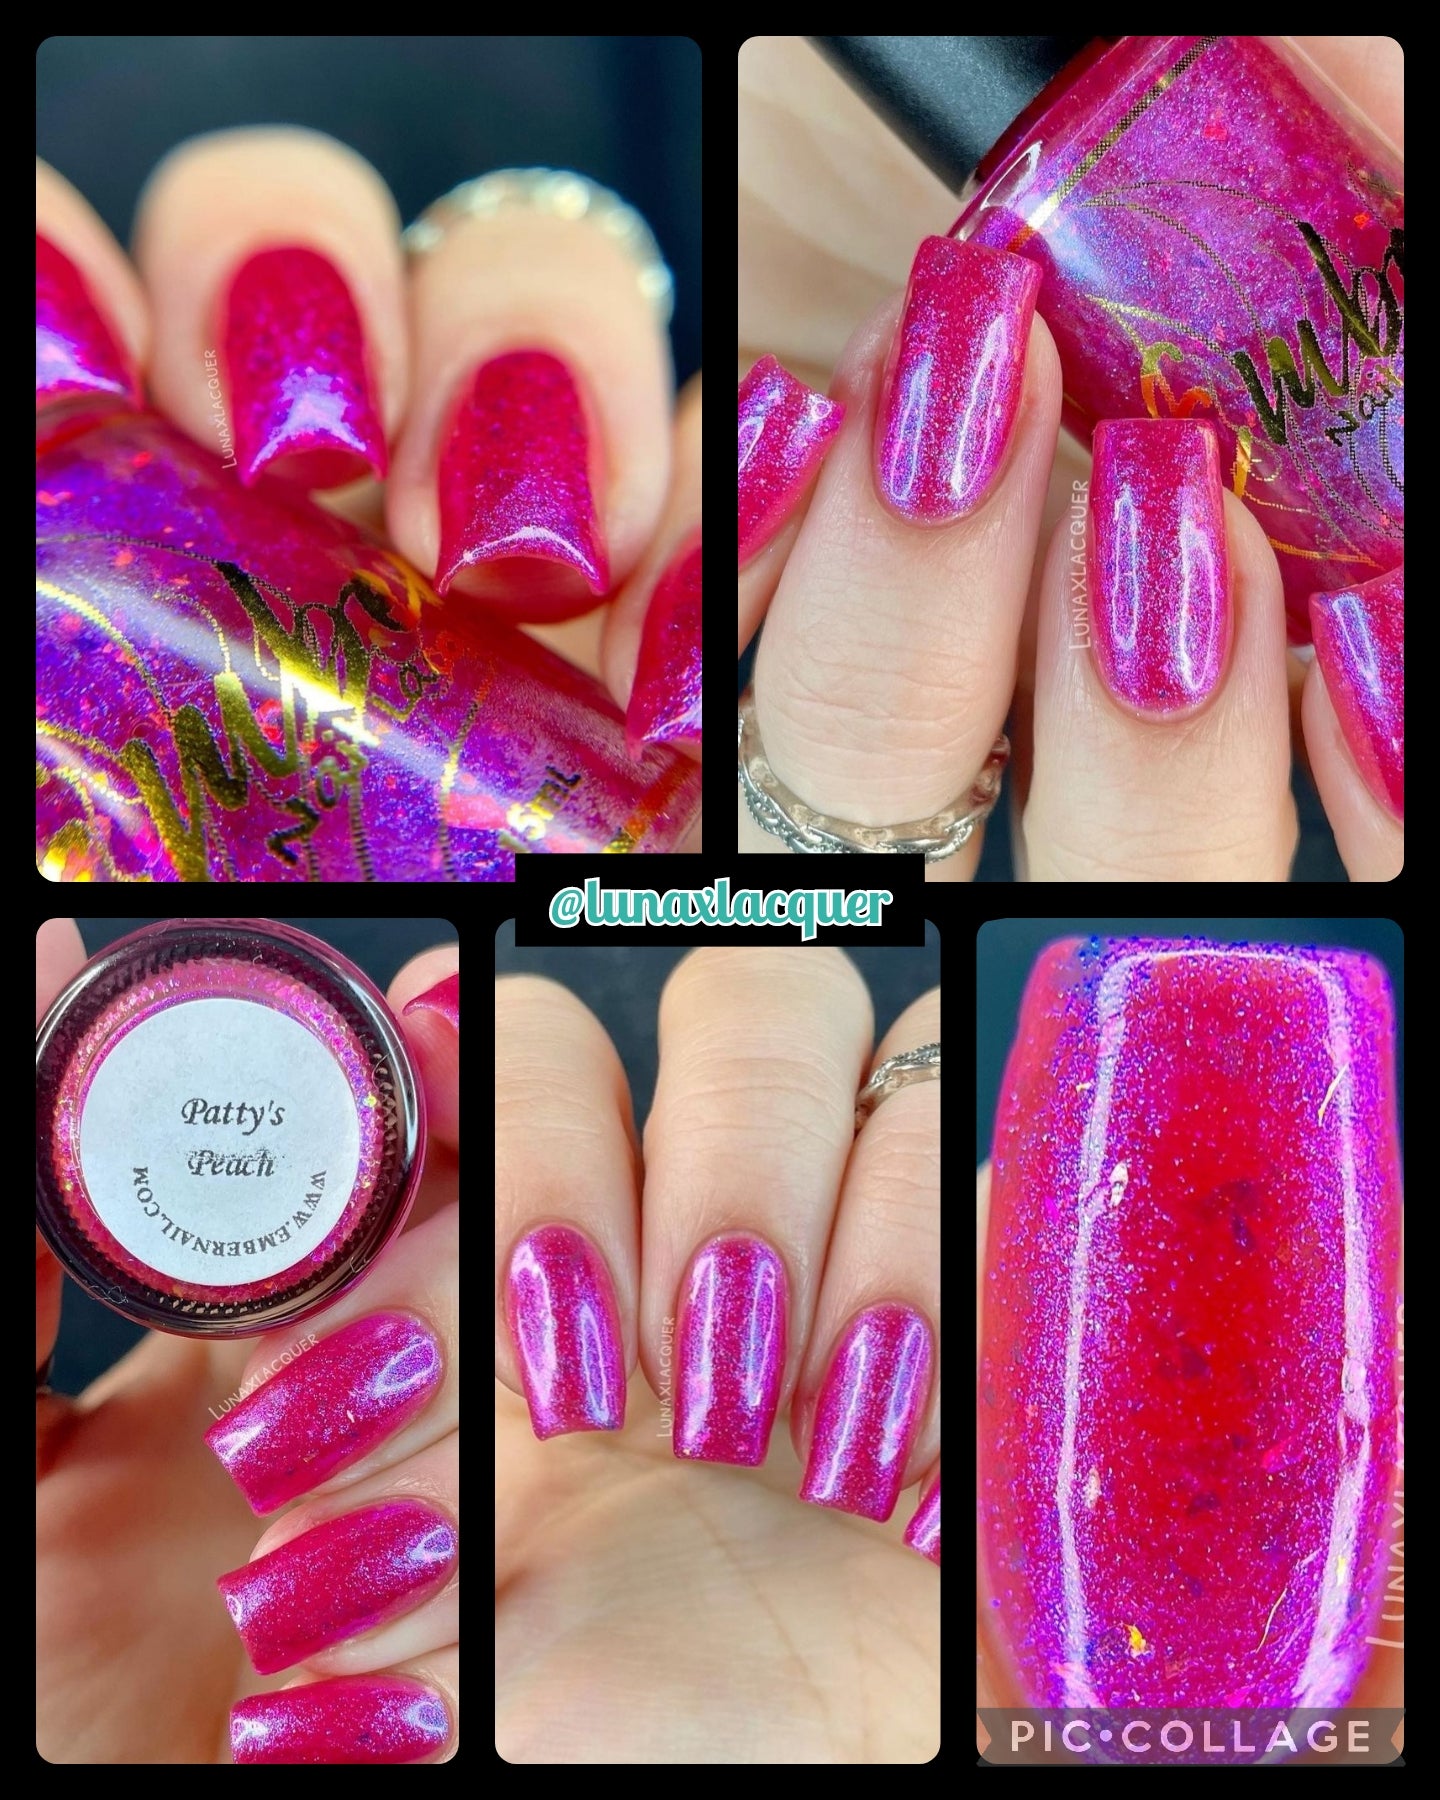 all nails from same base of Patty's Peach but with different effects